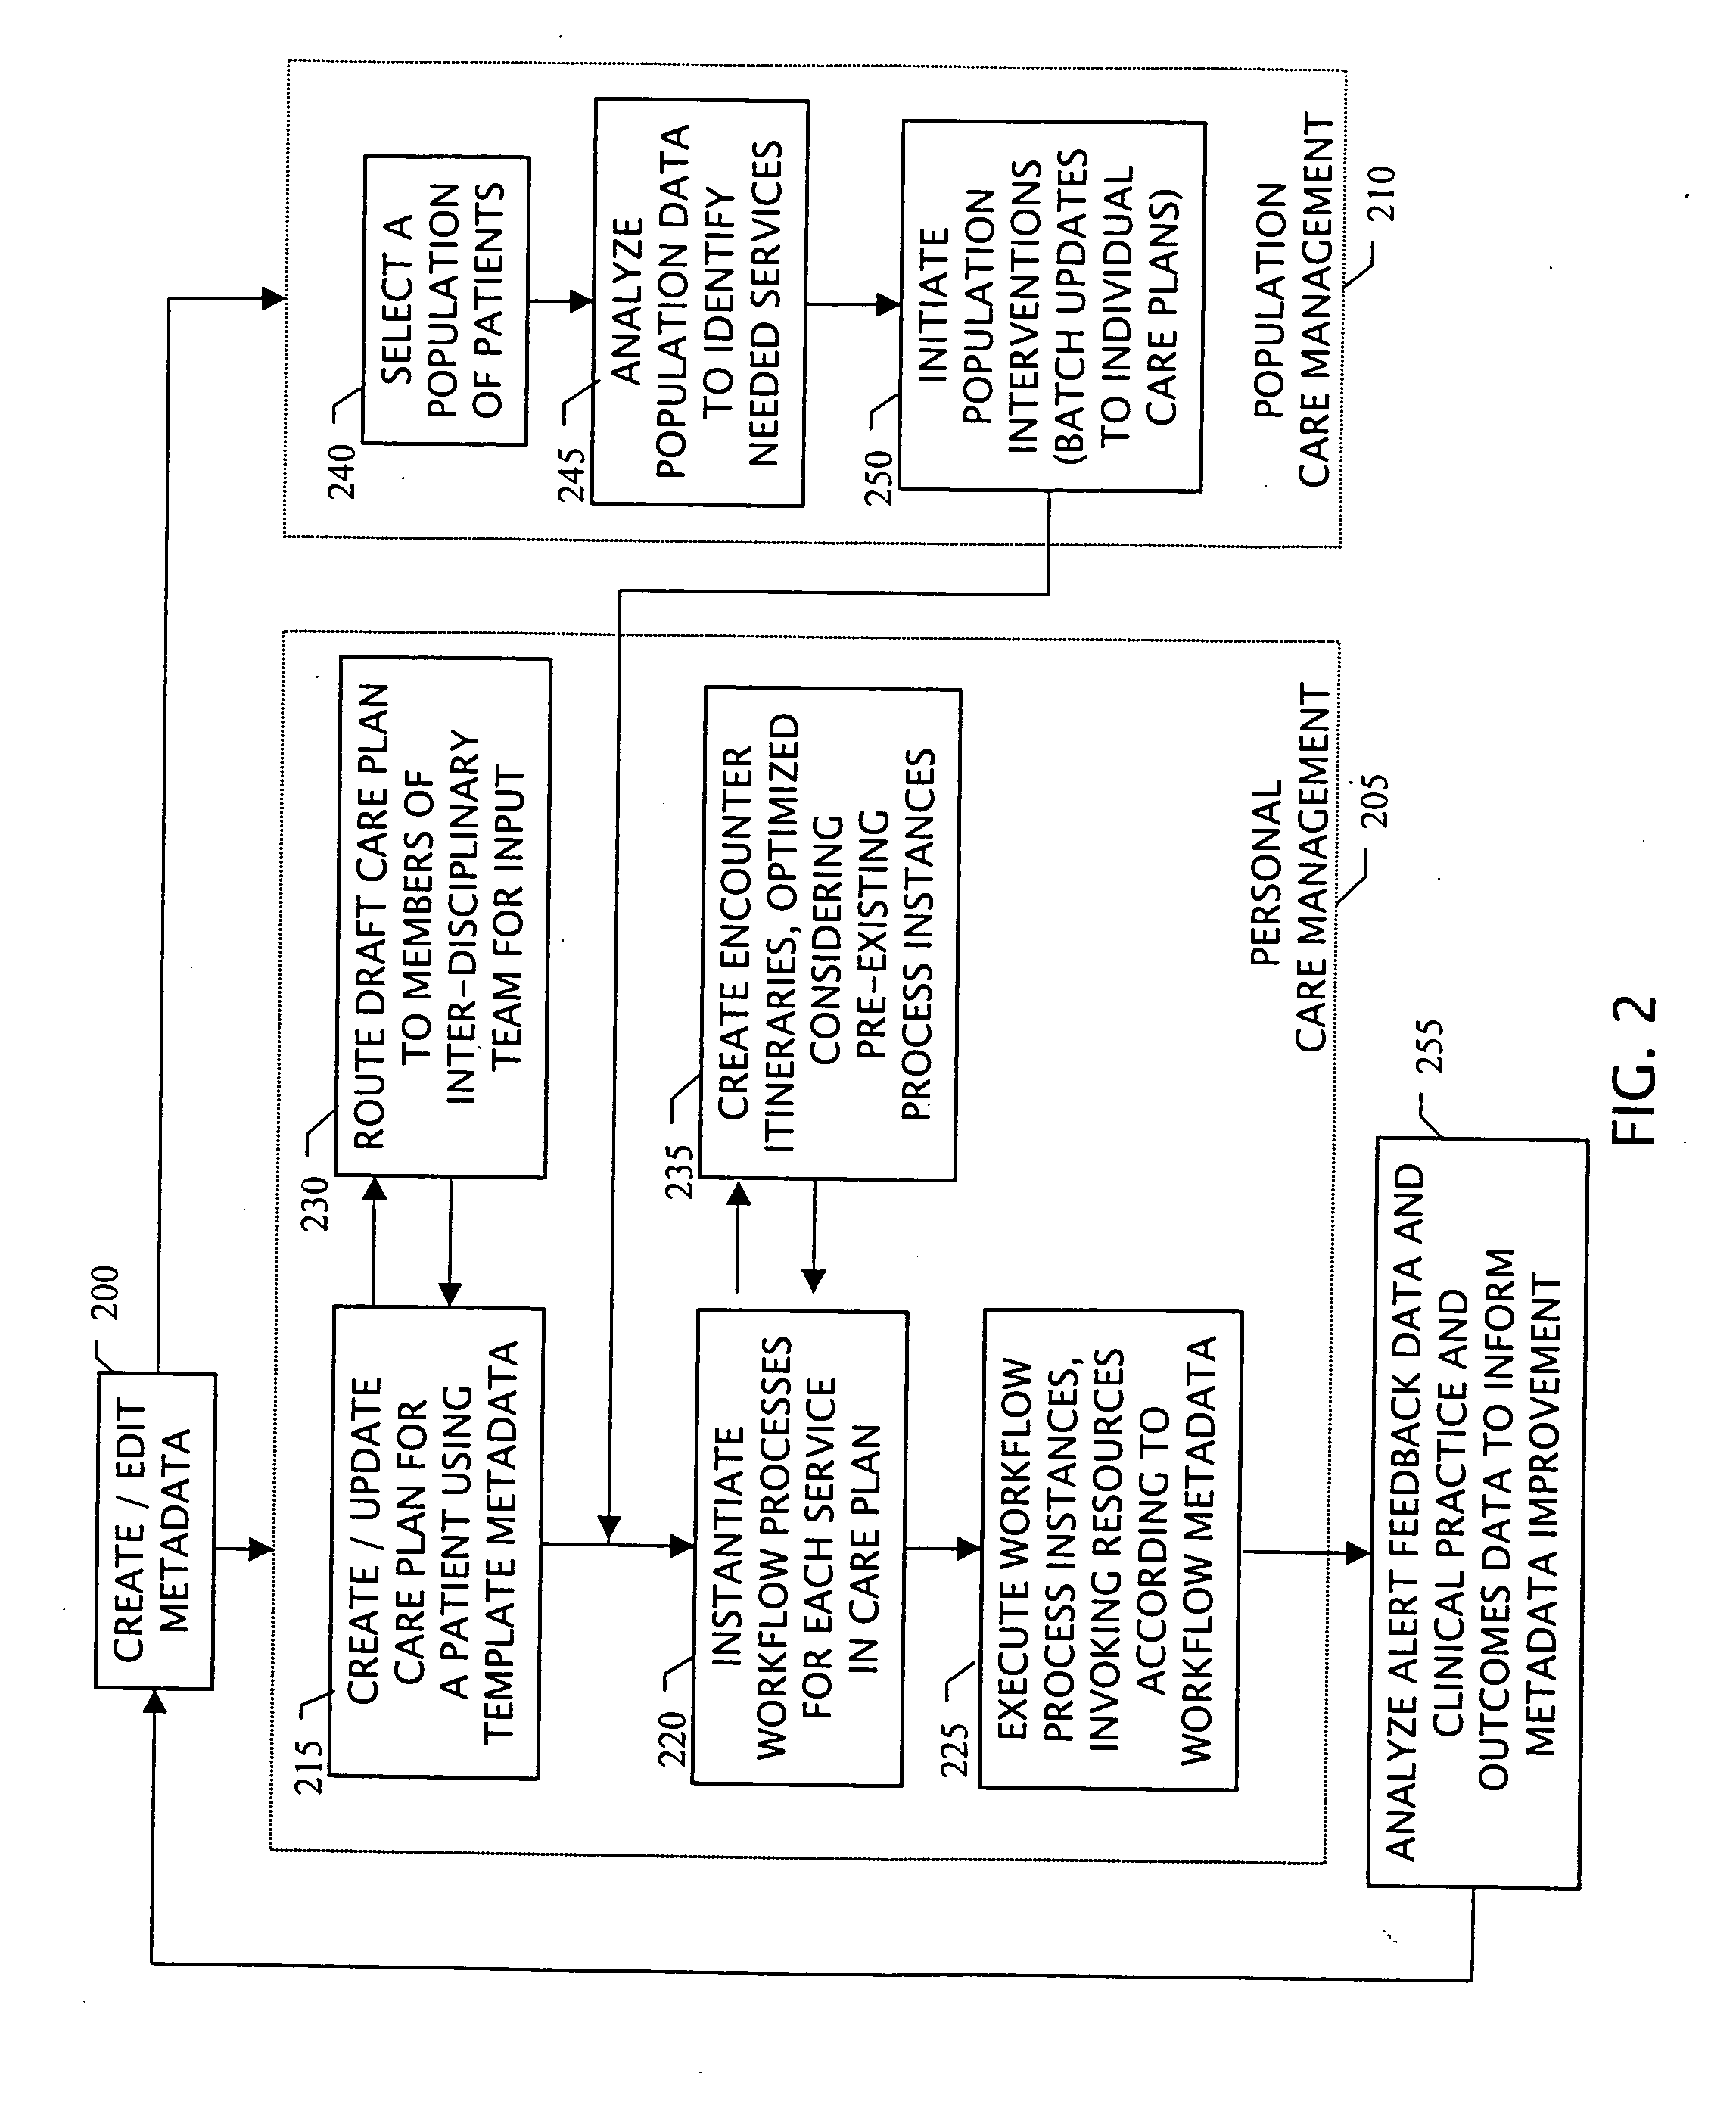 Method and system for customer service process management